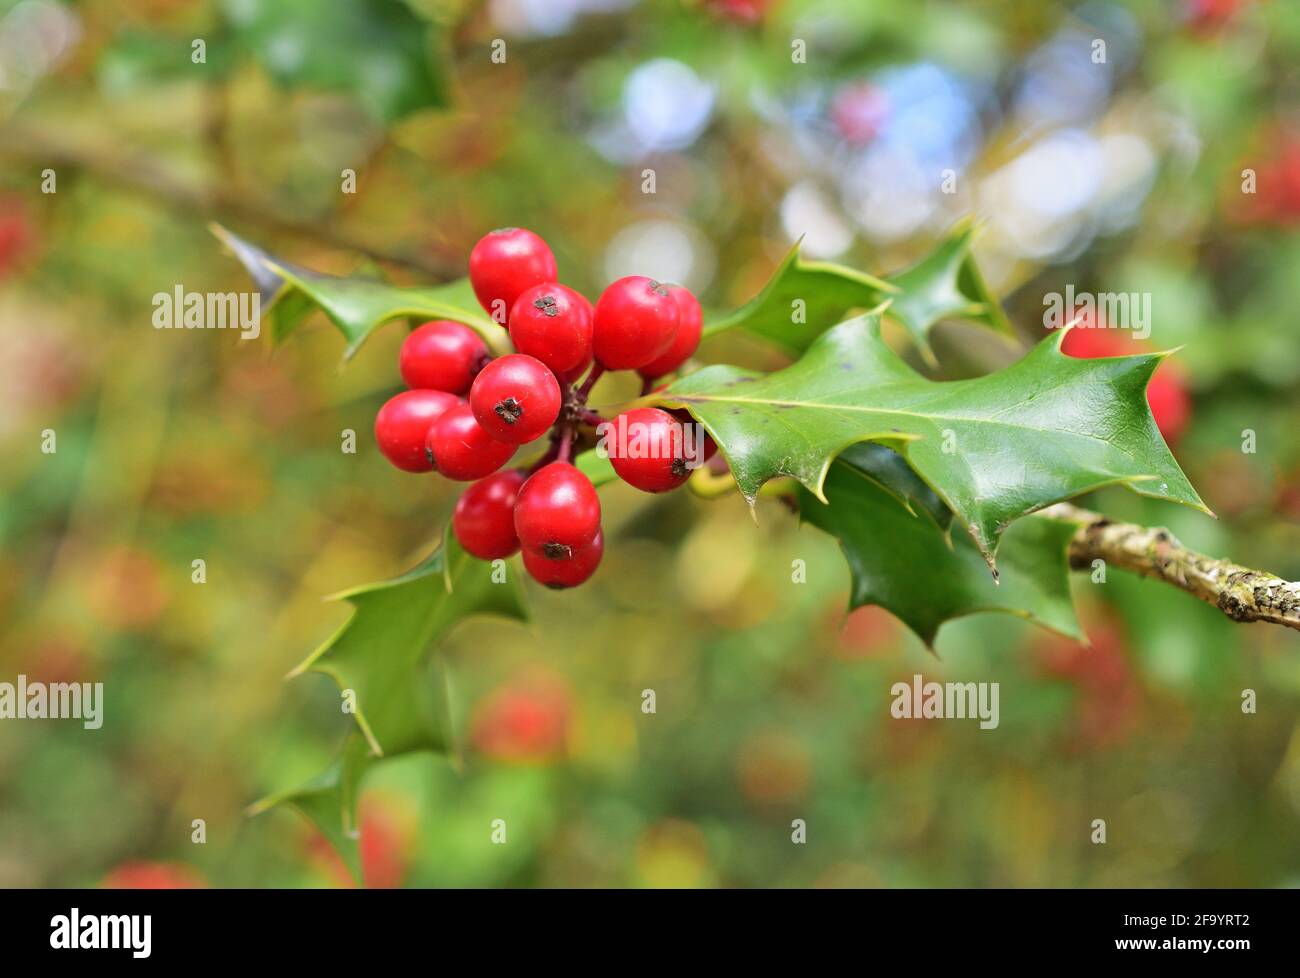 Ilex aquifolium, the common European holly used in Christmas decorations and cards Stock Photo